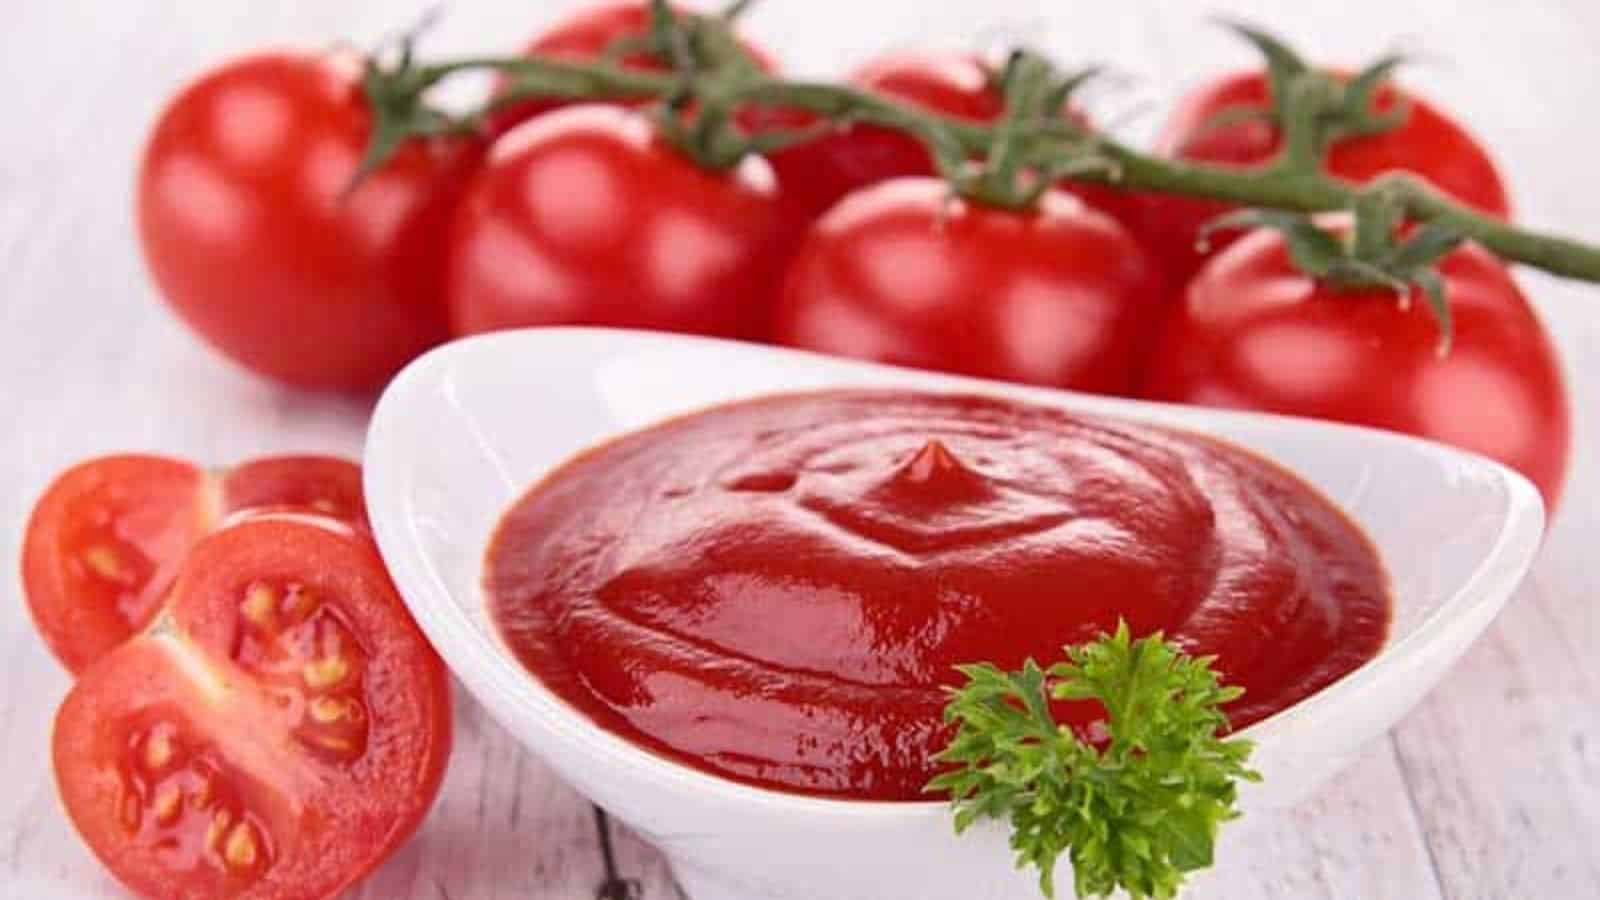 Tomato ketchup in a dip saucer with tomatoes on the side serve on the table.